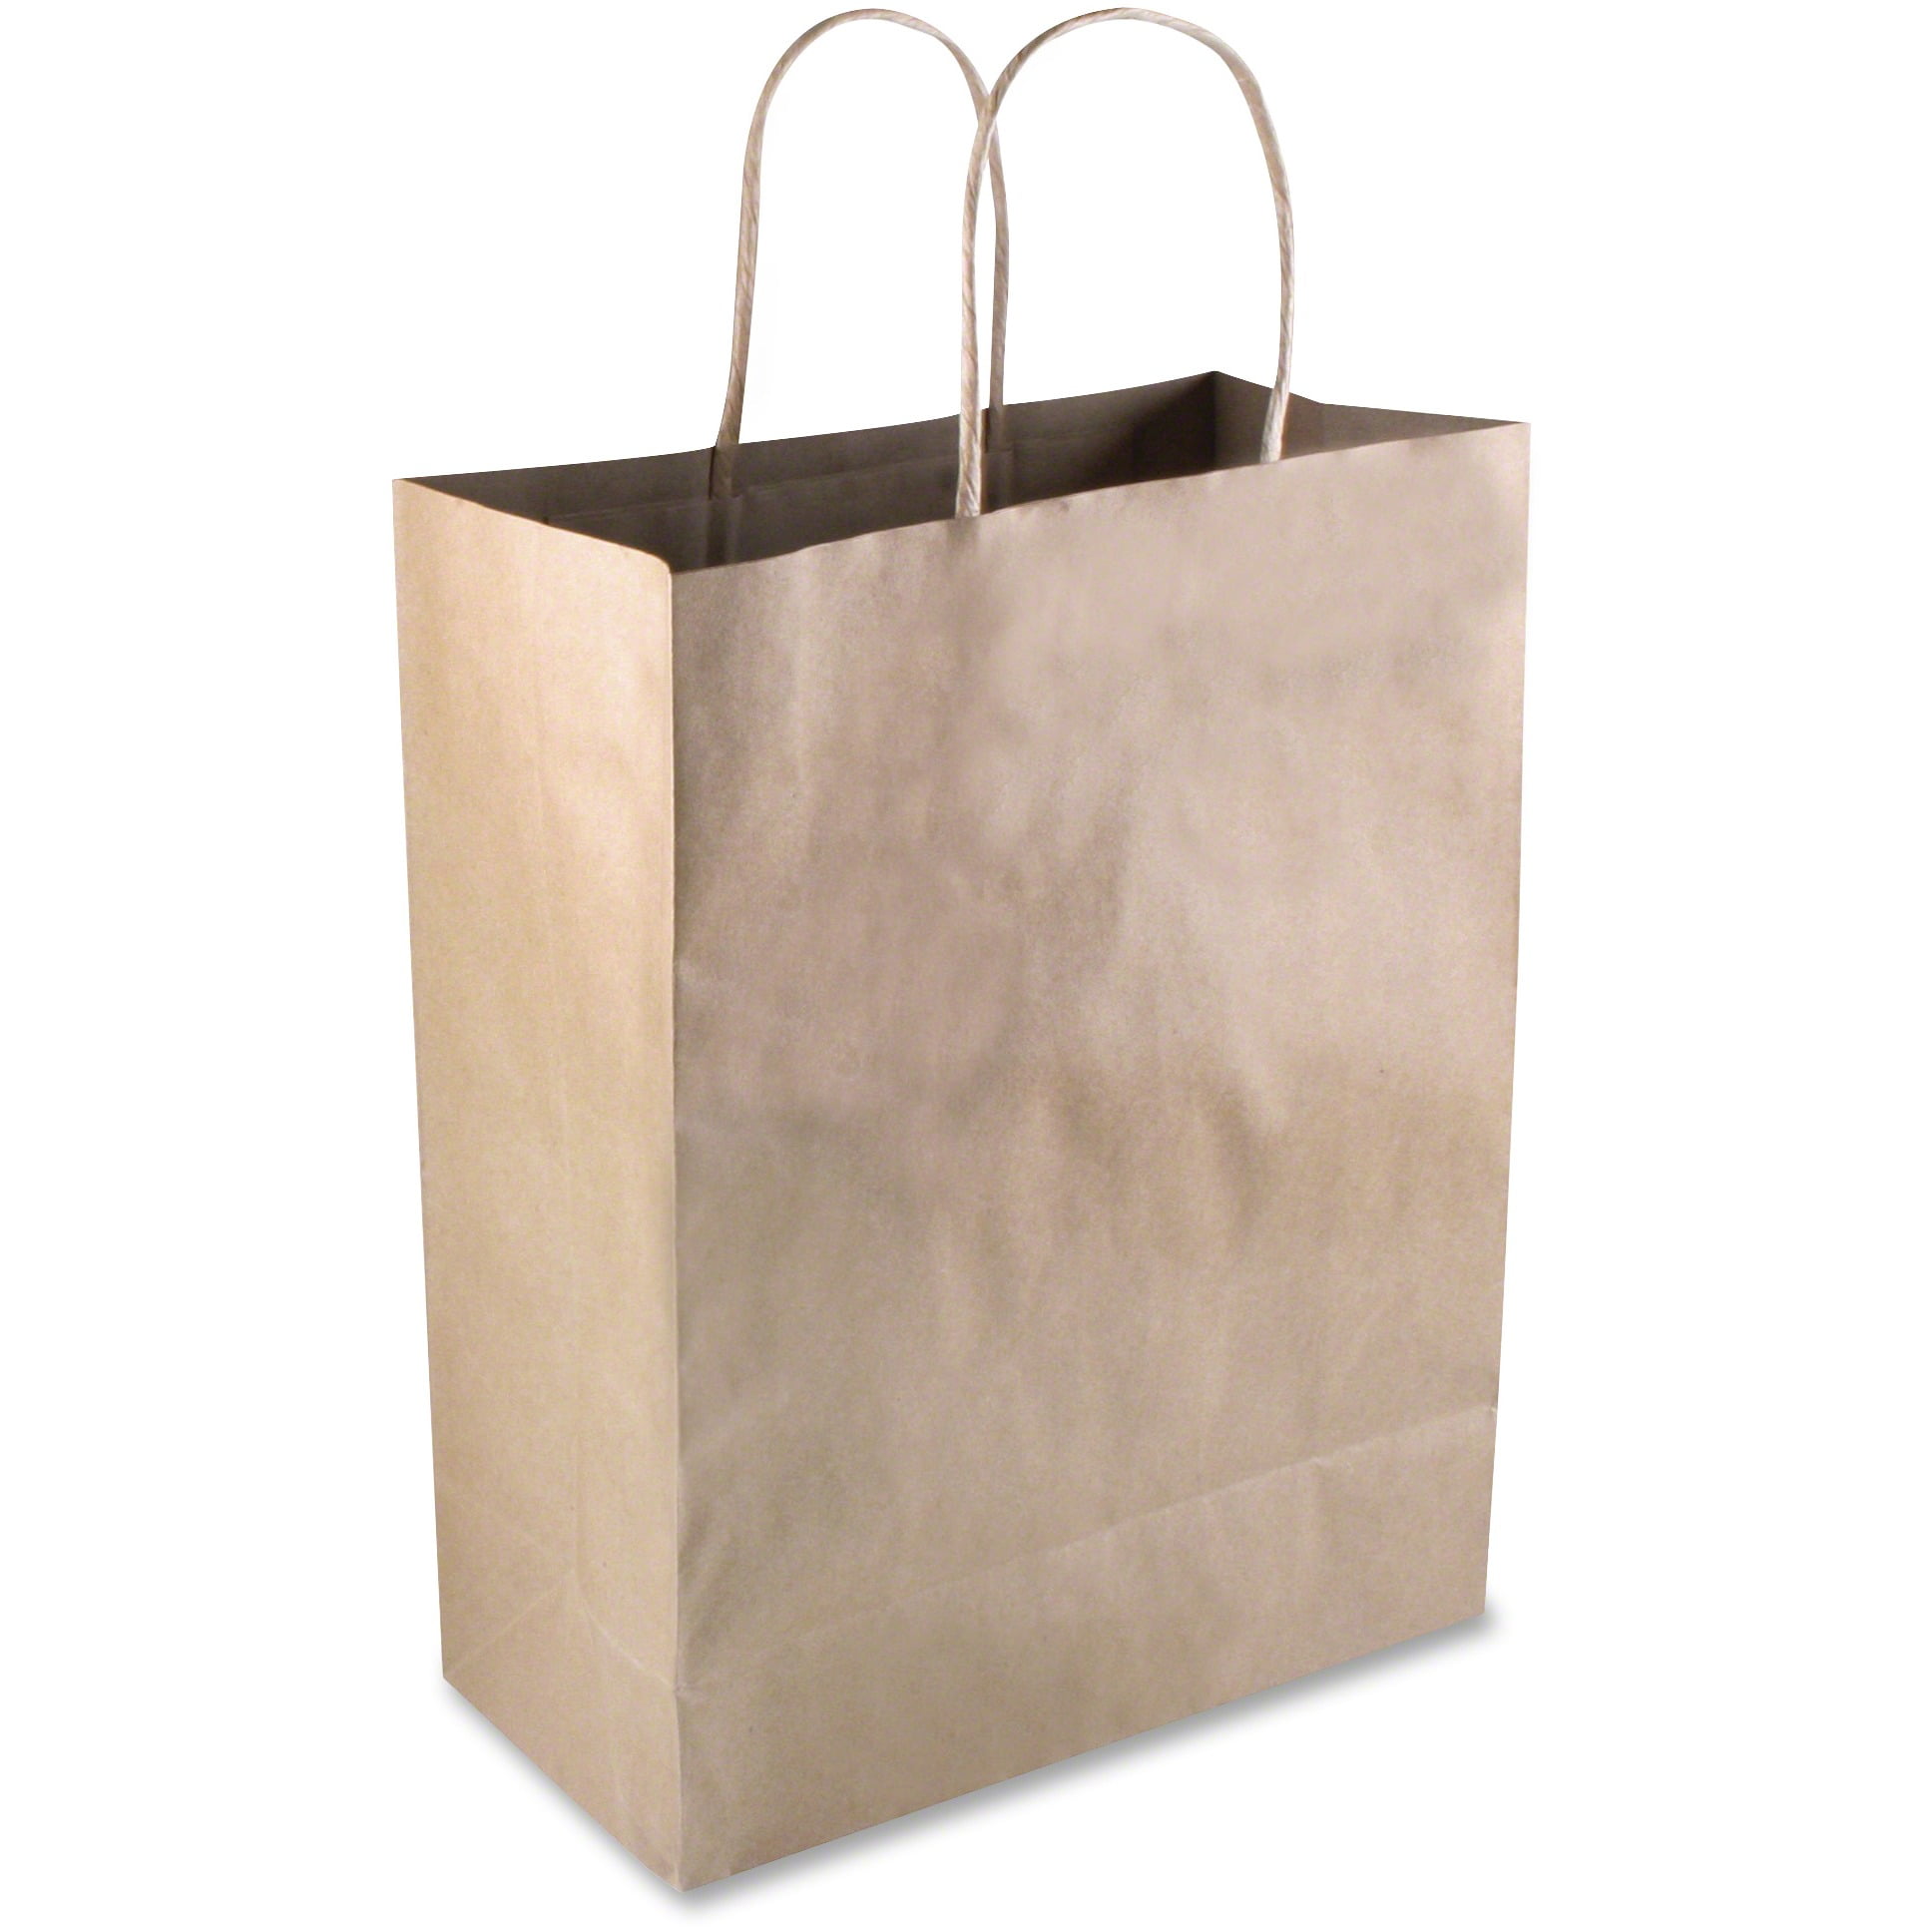 Strong Brown Kraft Paper Grocery Carrier Eco Bag With Premium Quality Pack of 10 